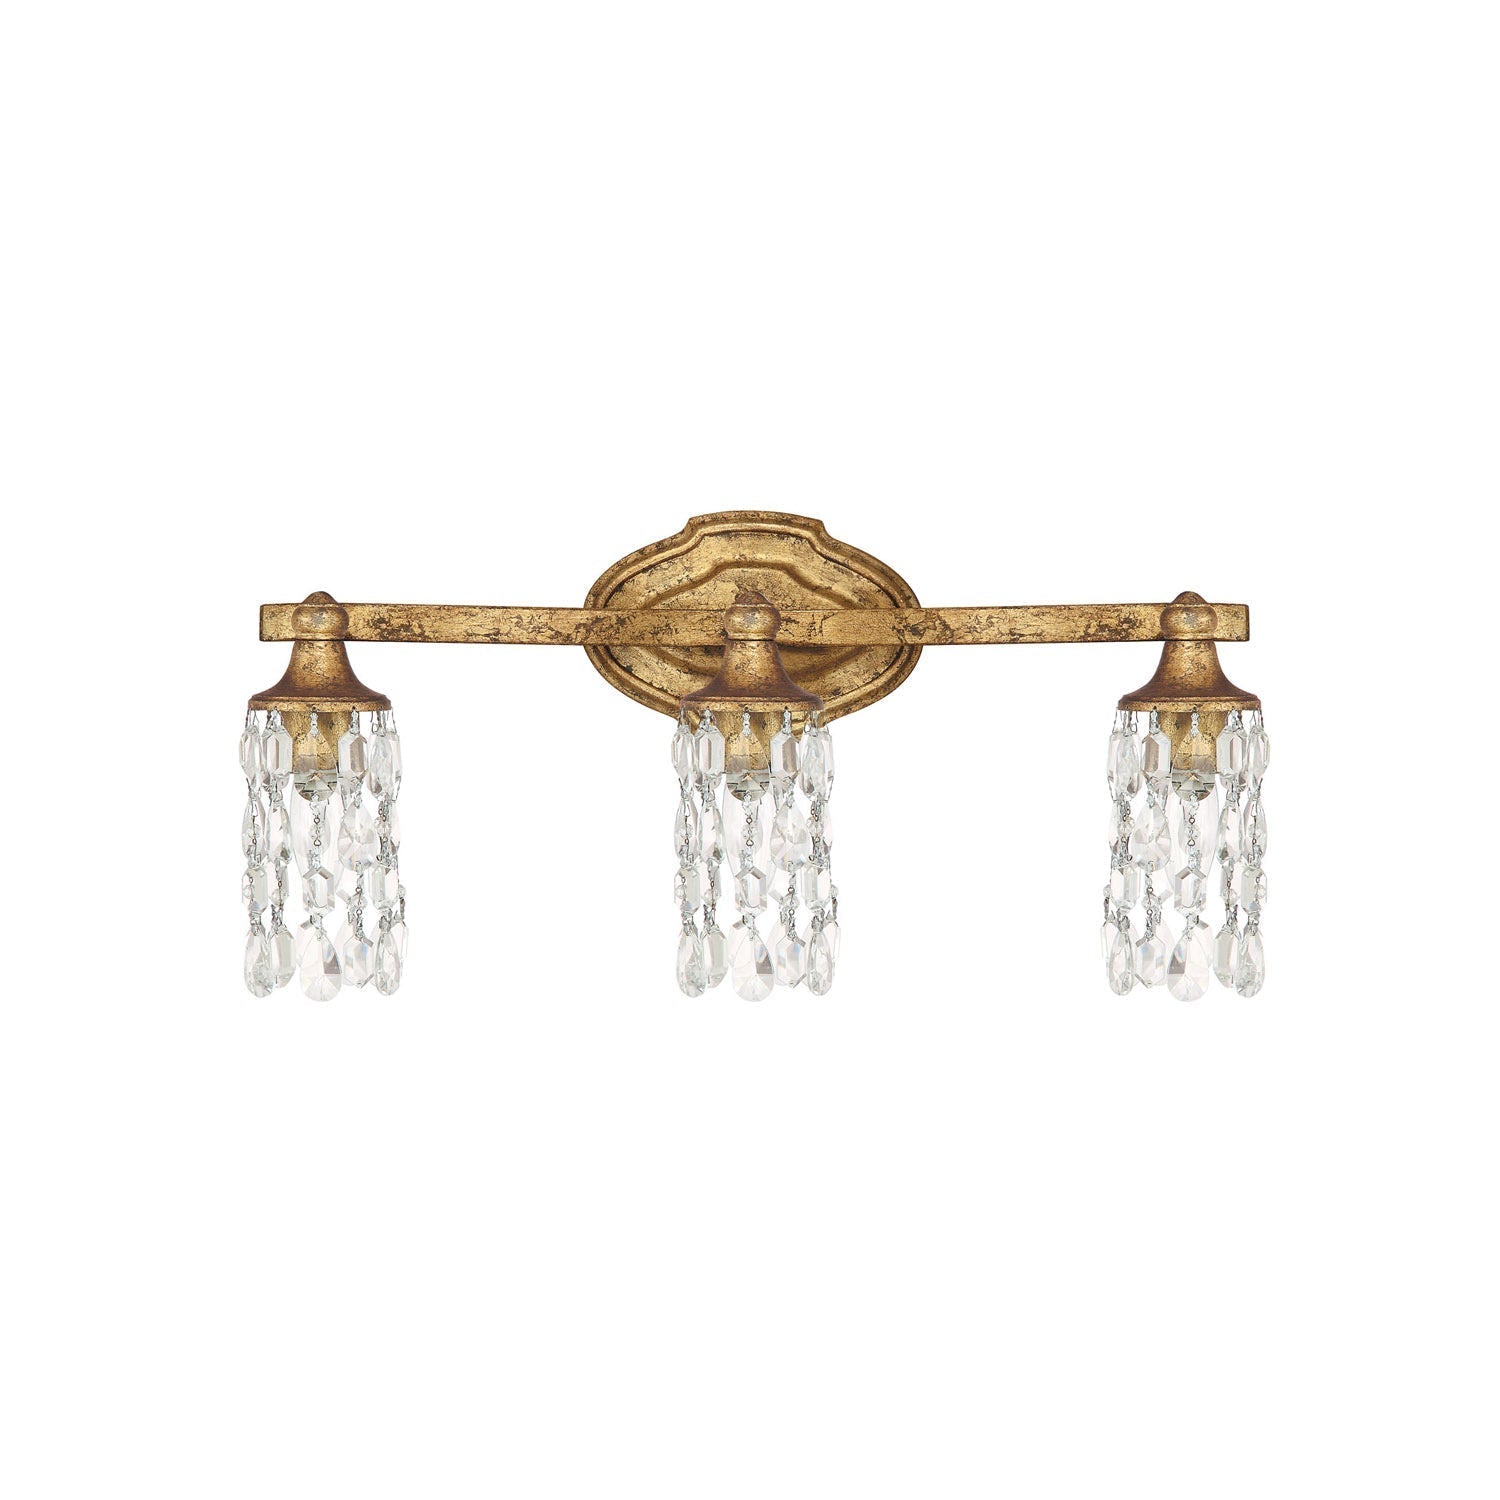 Capital Blakely 8523AG-CR Bath Vanity Light 21 in. wide - Antique Gold